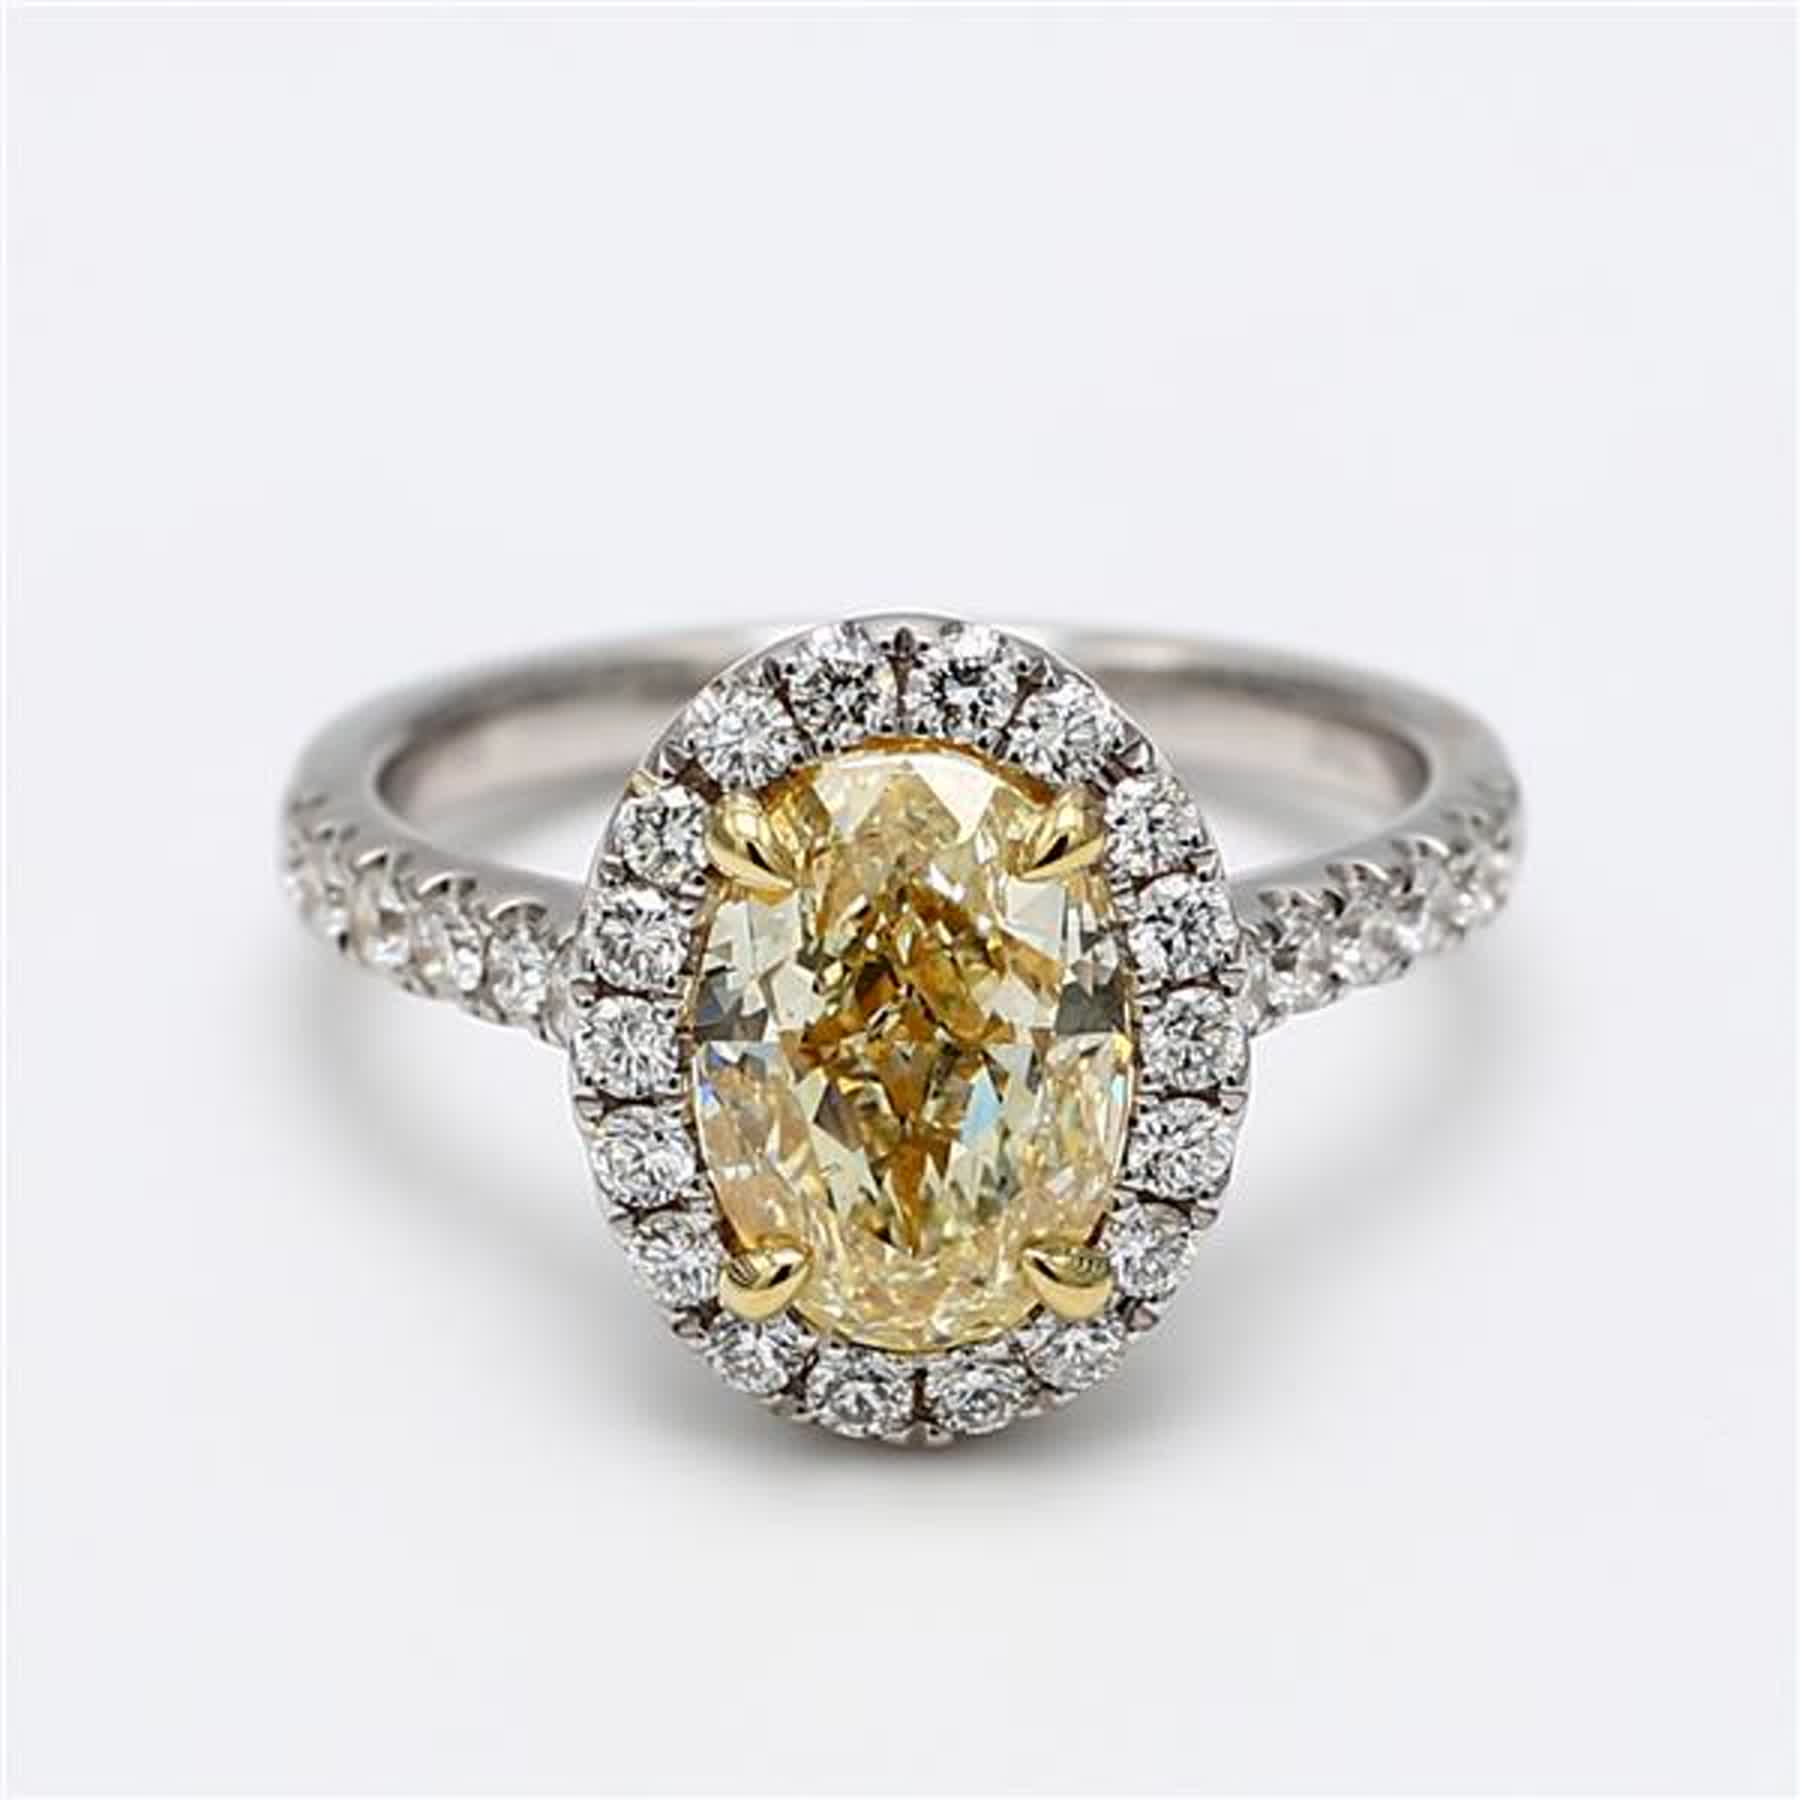 GIA Certified Natural Yellow Oval and White Diamond 3.11 Carat TW Platinum Ring